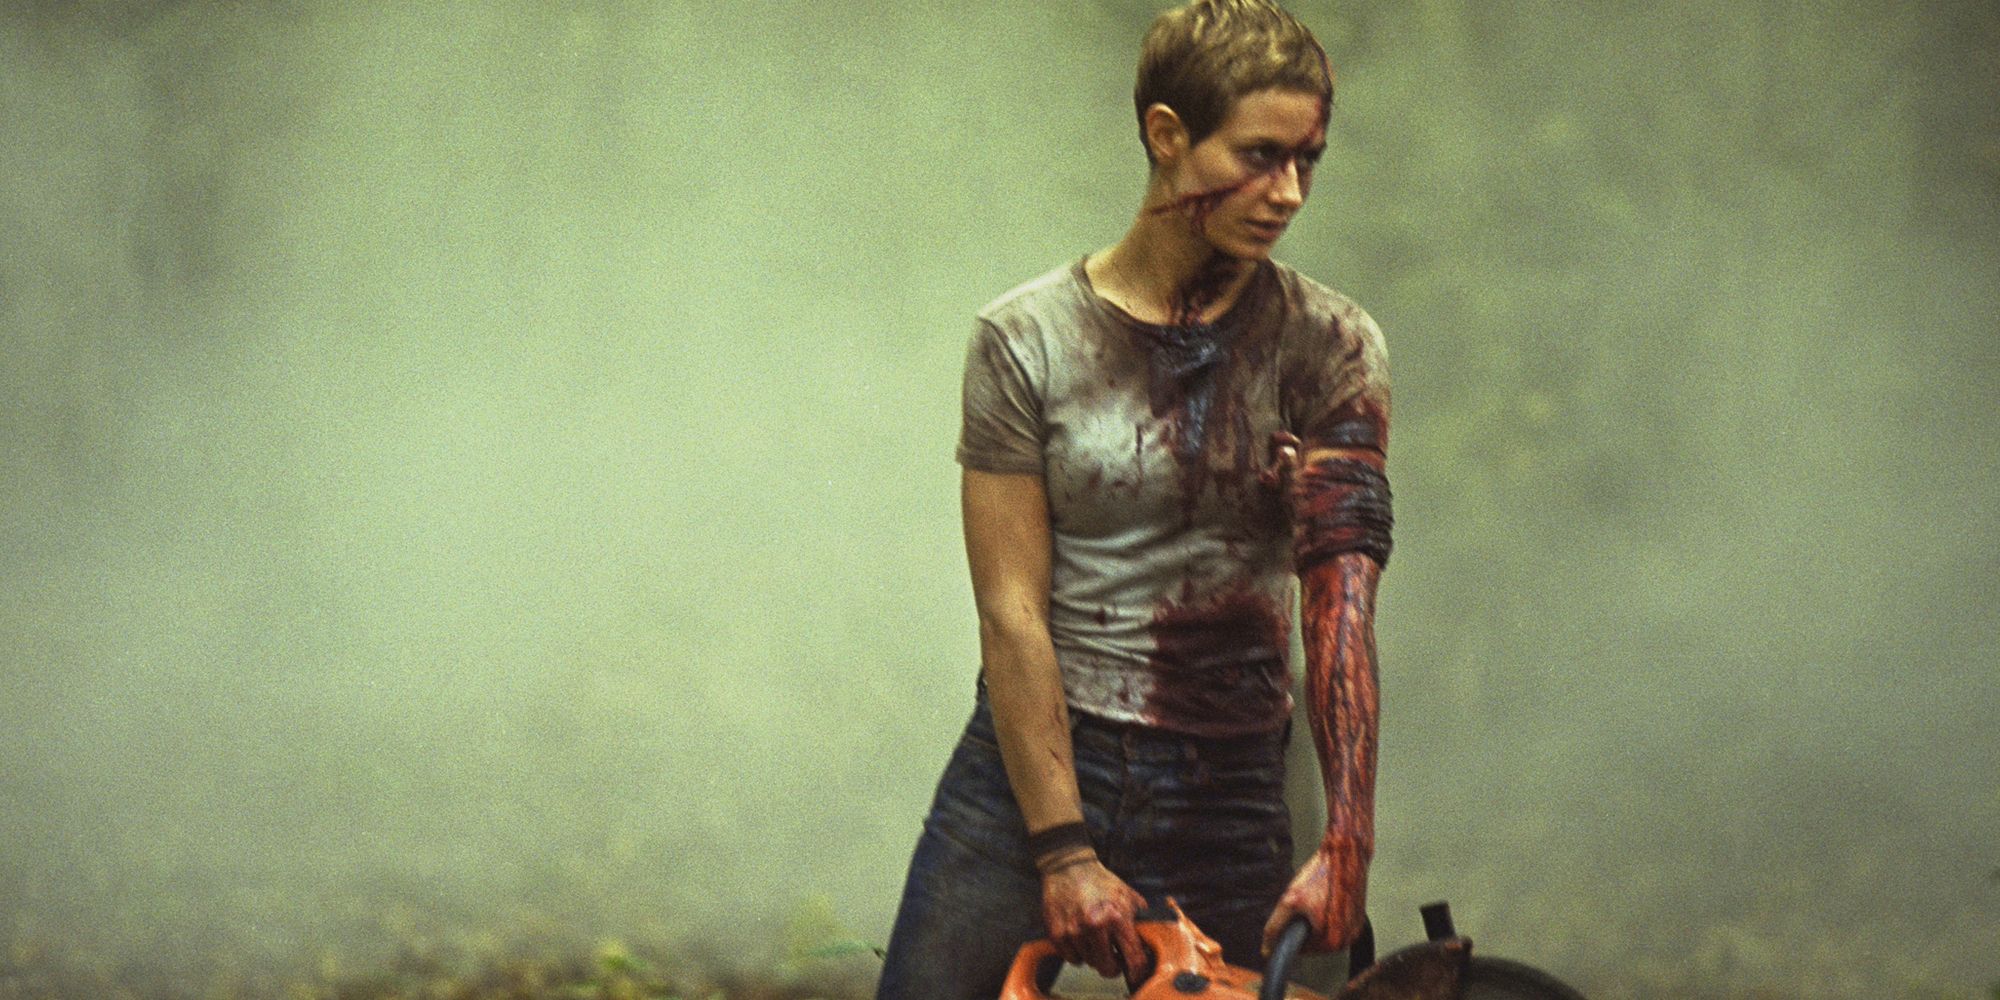 Still from 'High Tension': Marie (Cécile de France), covered in blood, holds a chainsaw. 